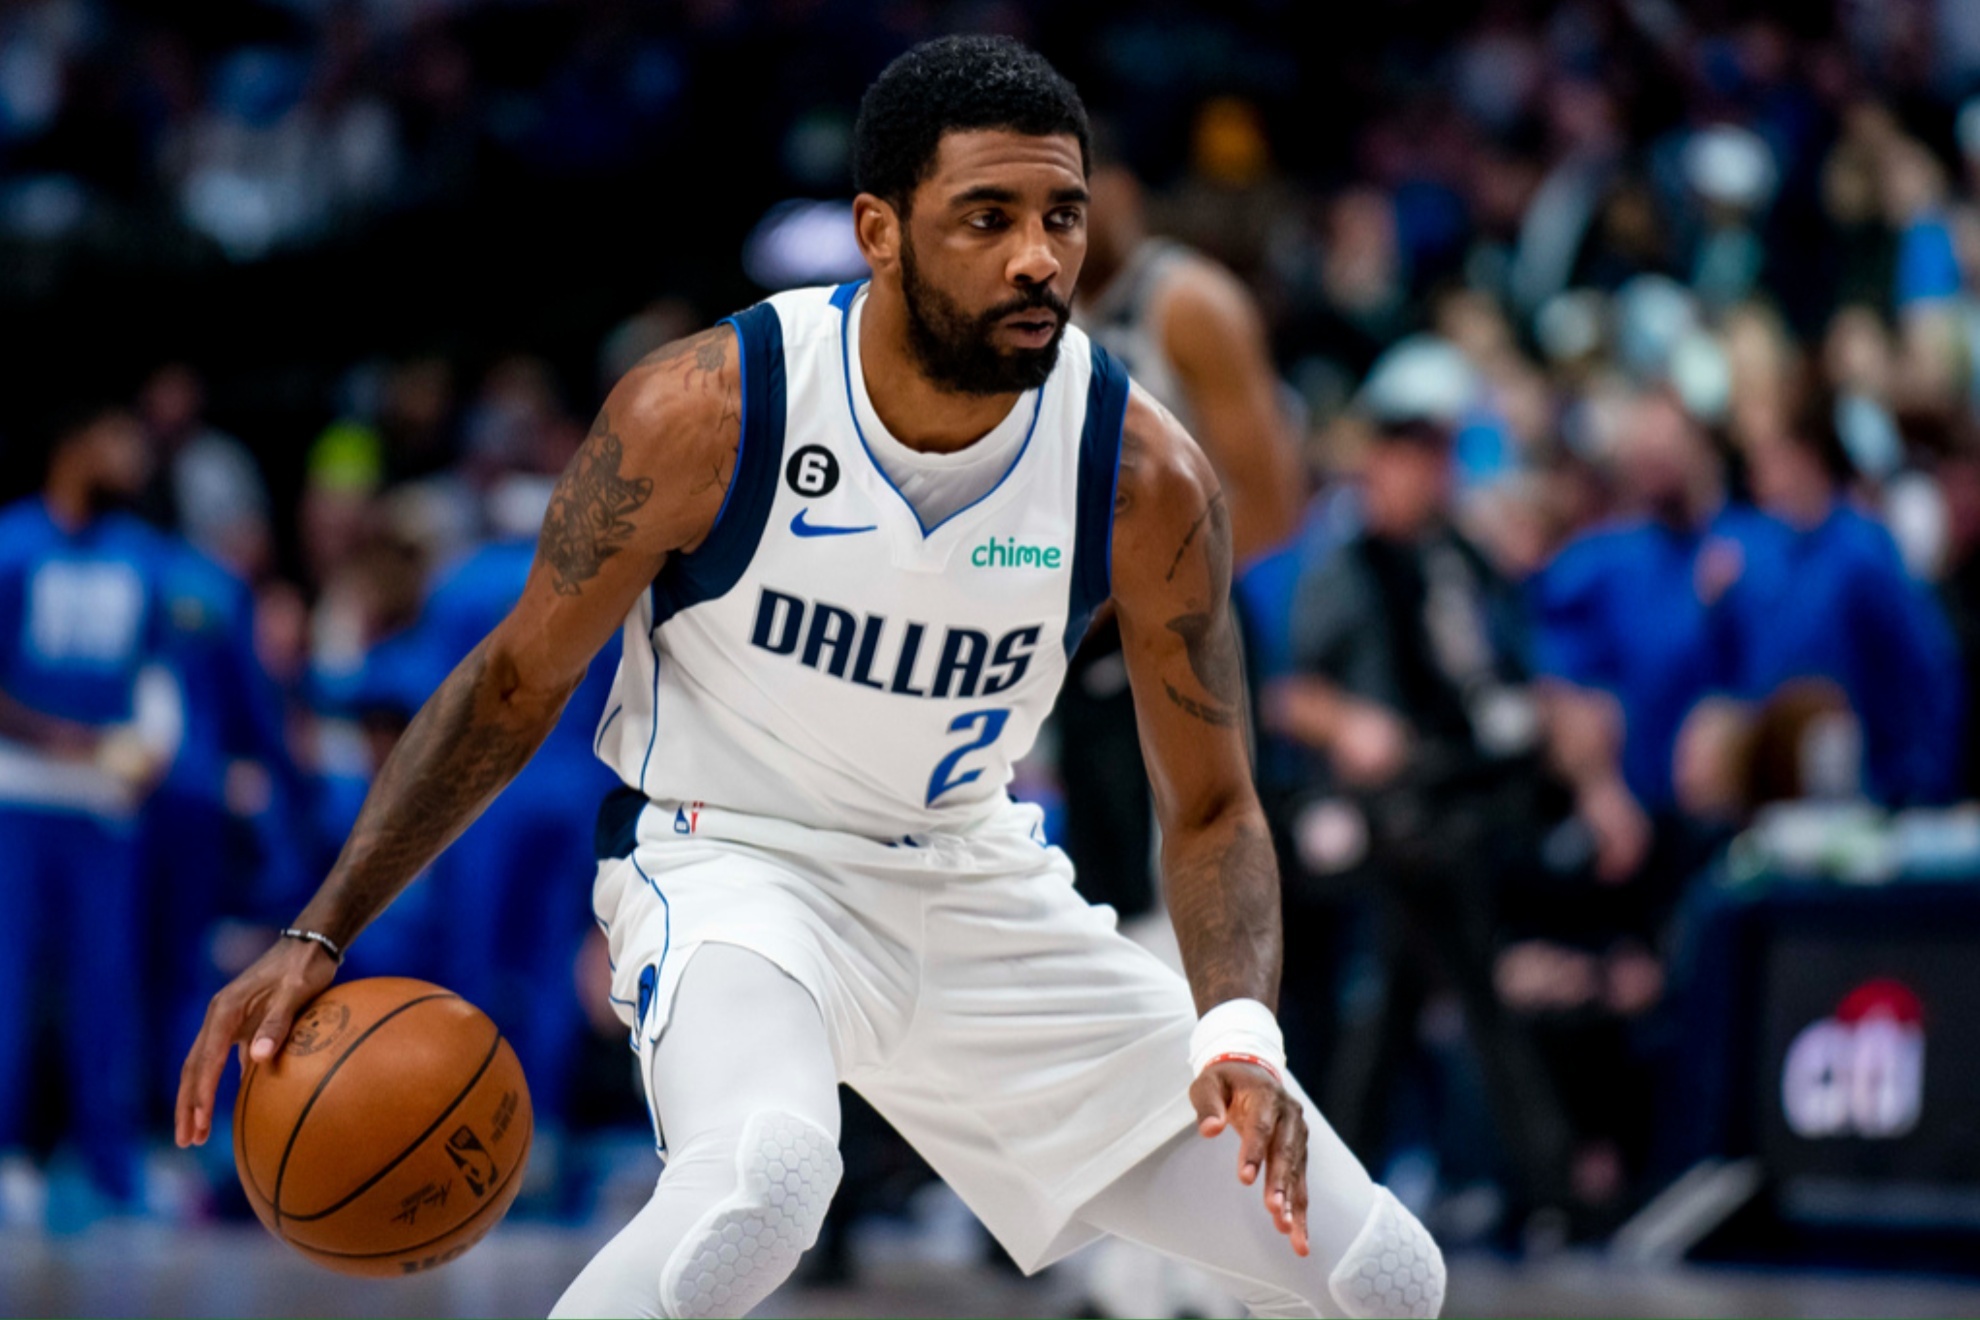 Kyrie Irving agreed on a new deal to remain with the Dallas Mavericks